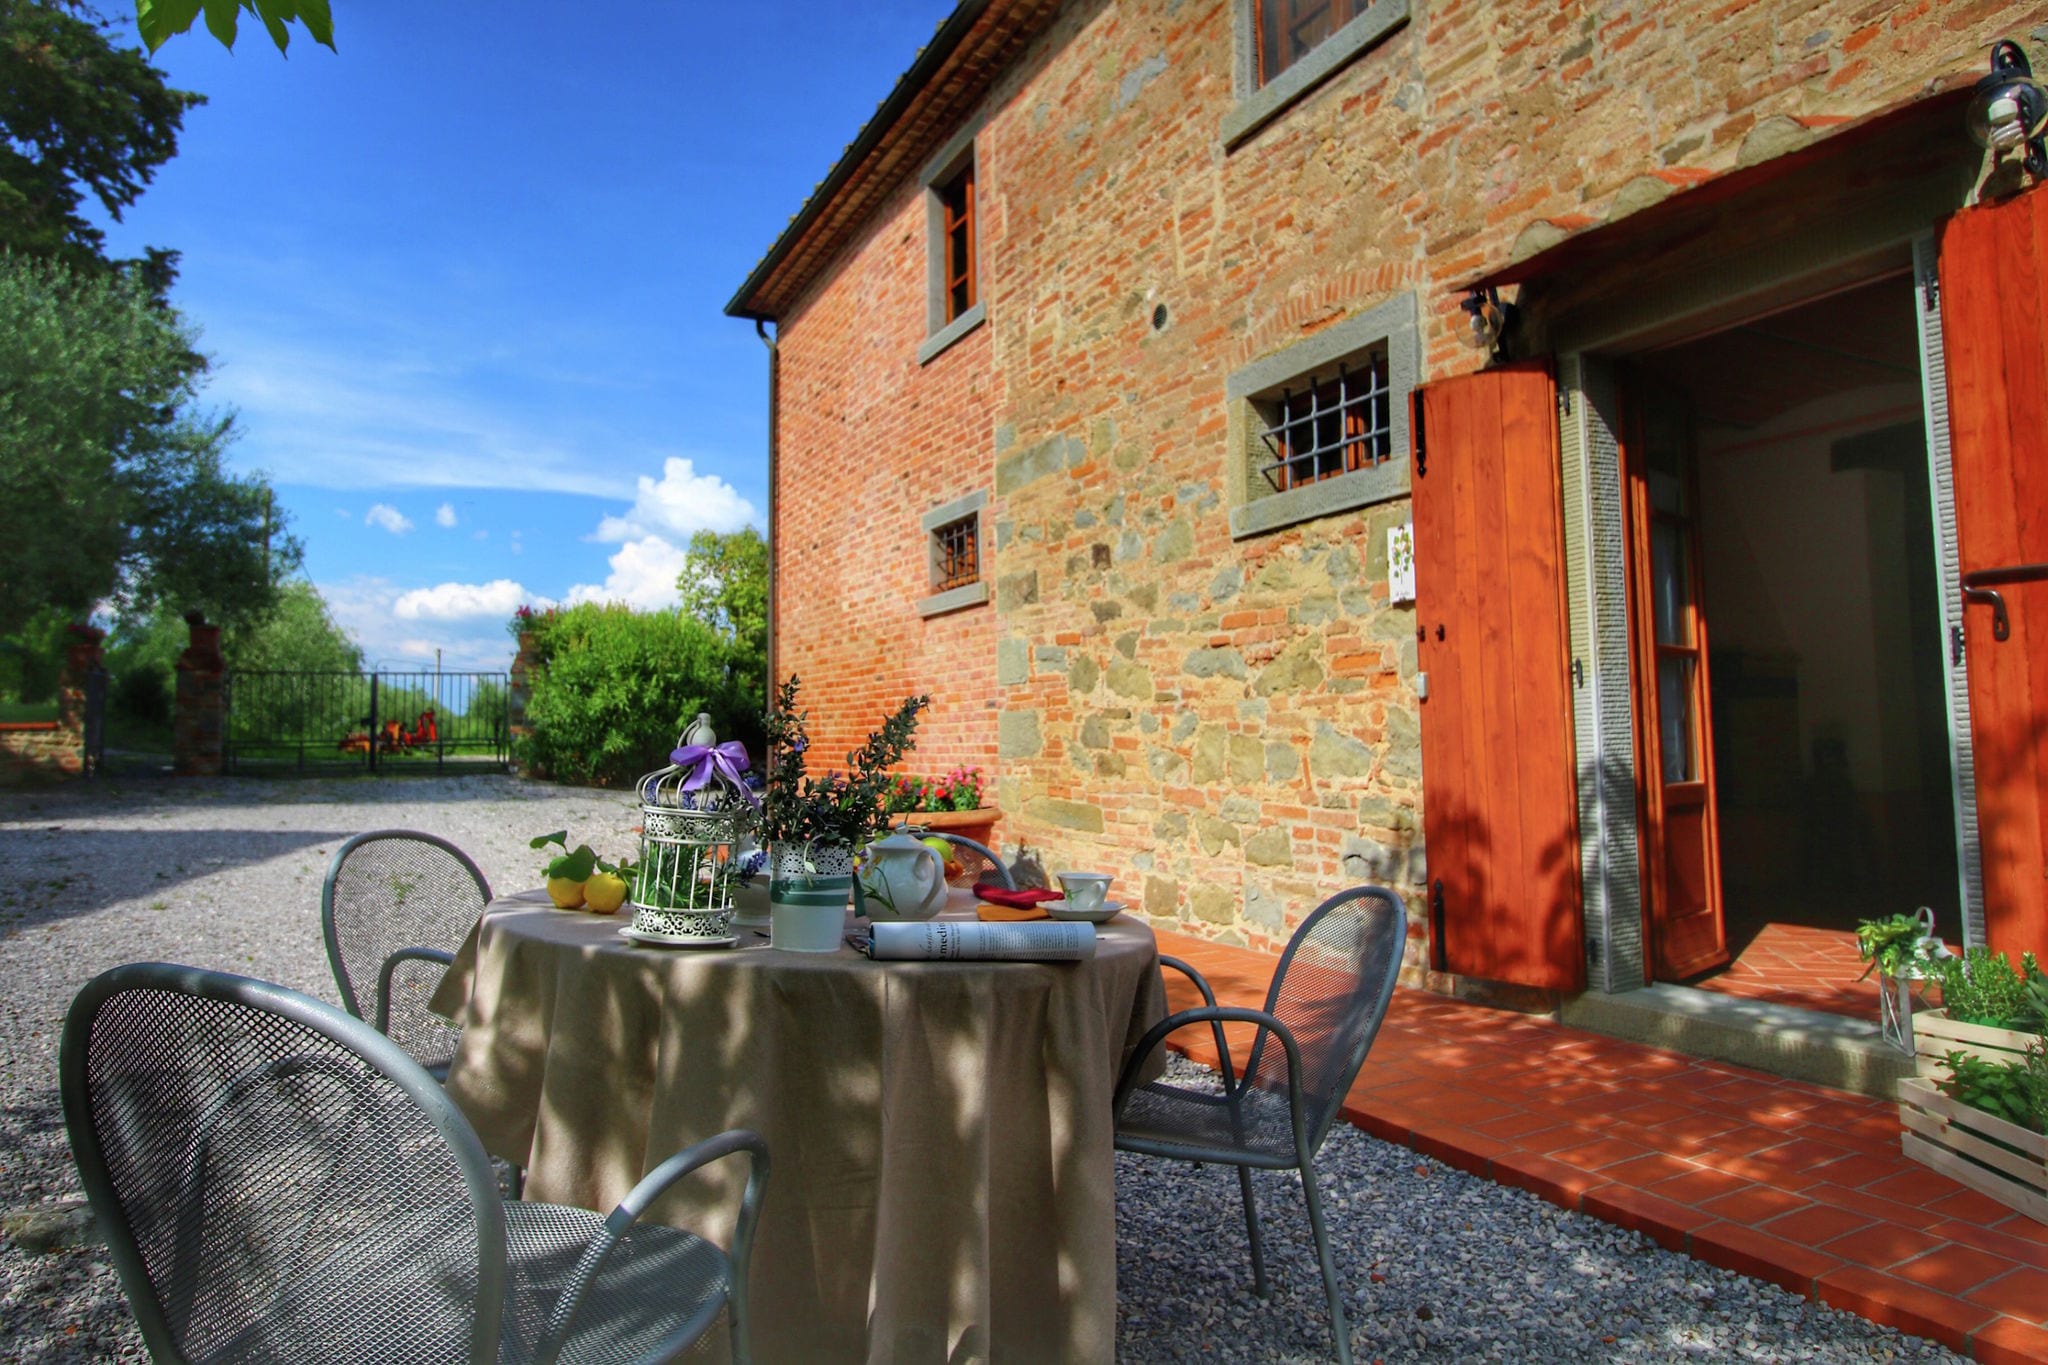 A charming agritourism complex in the Chiana Valley.